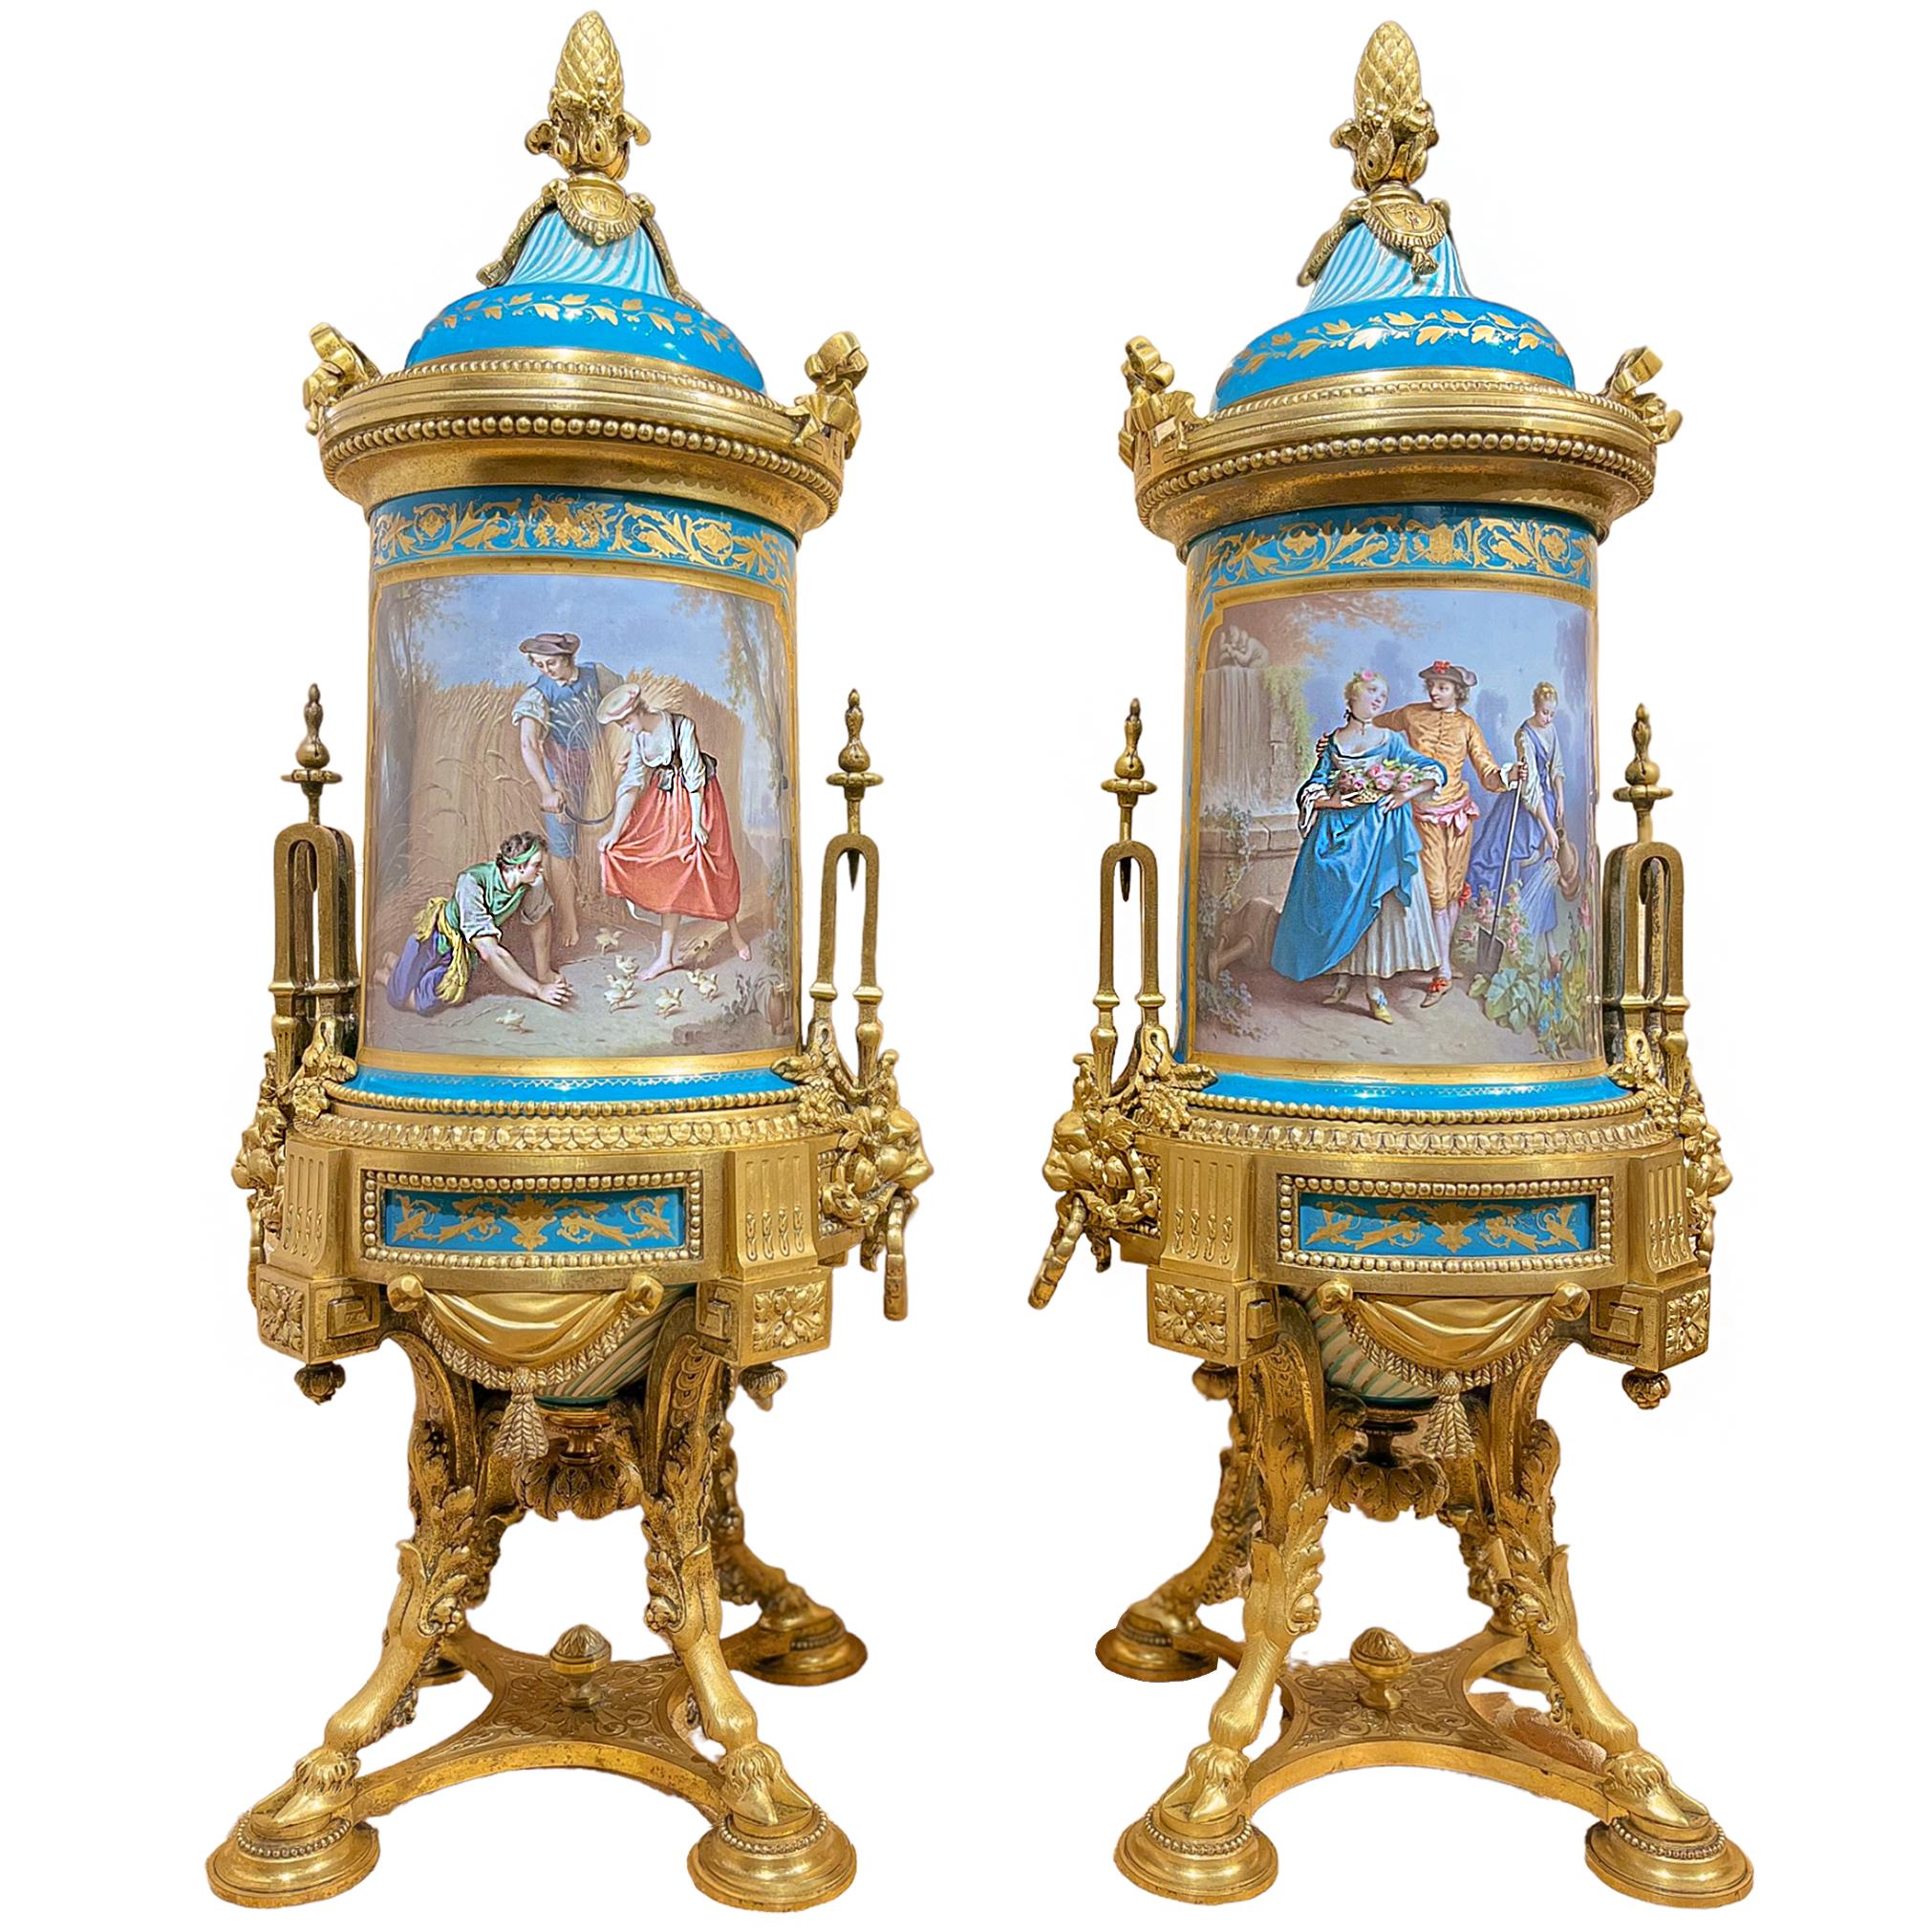 Double sided porcelain urns with genre scenes and still life paintings on their reverse. The piece demonstrates the technical excellence of Sèvres porcelain, with delicate gold leaf in the form of foliage and garlands applied to the porcelain